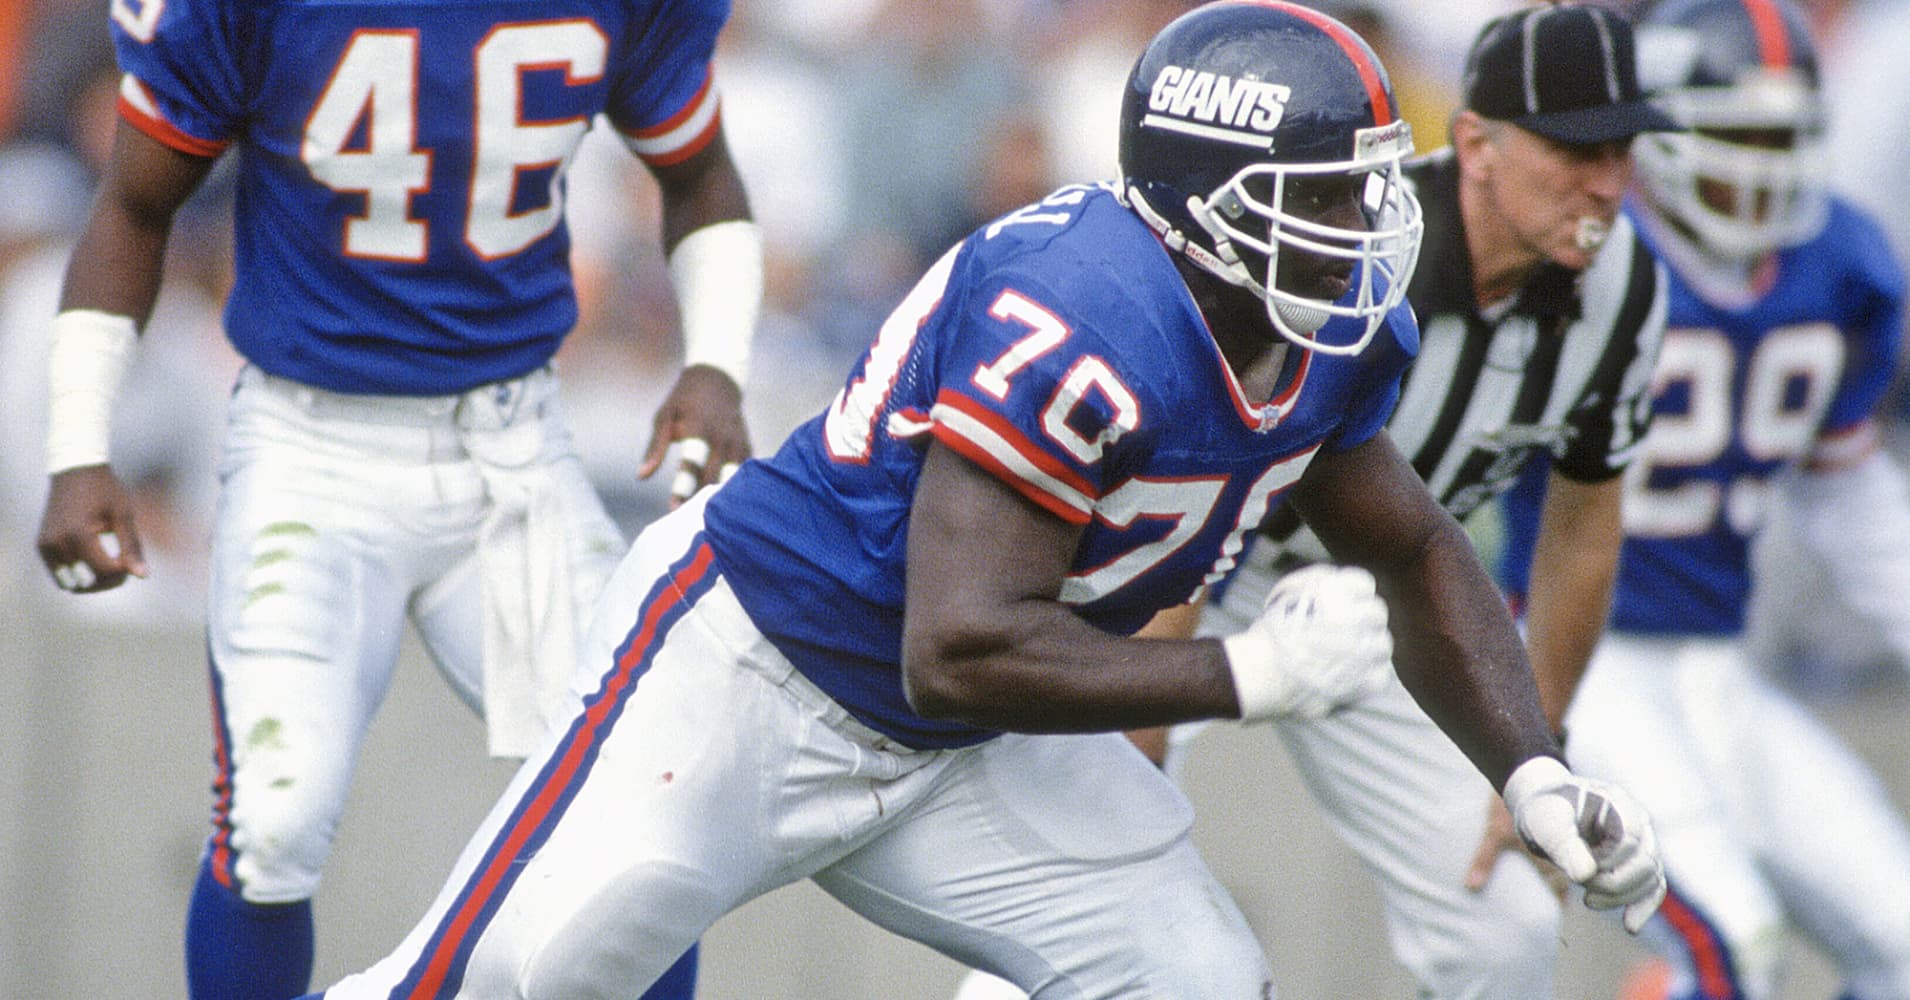 NFL pro Leonard Marshall looks to keep players from going broke1910 x 1000